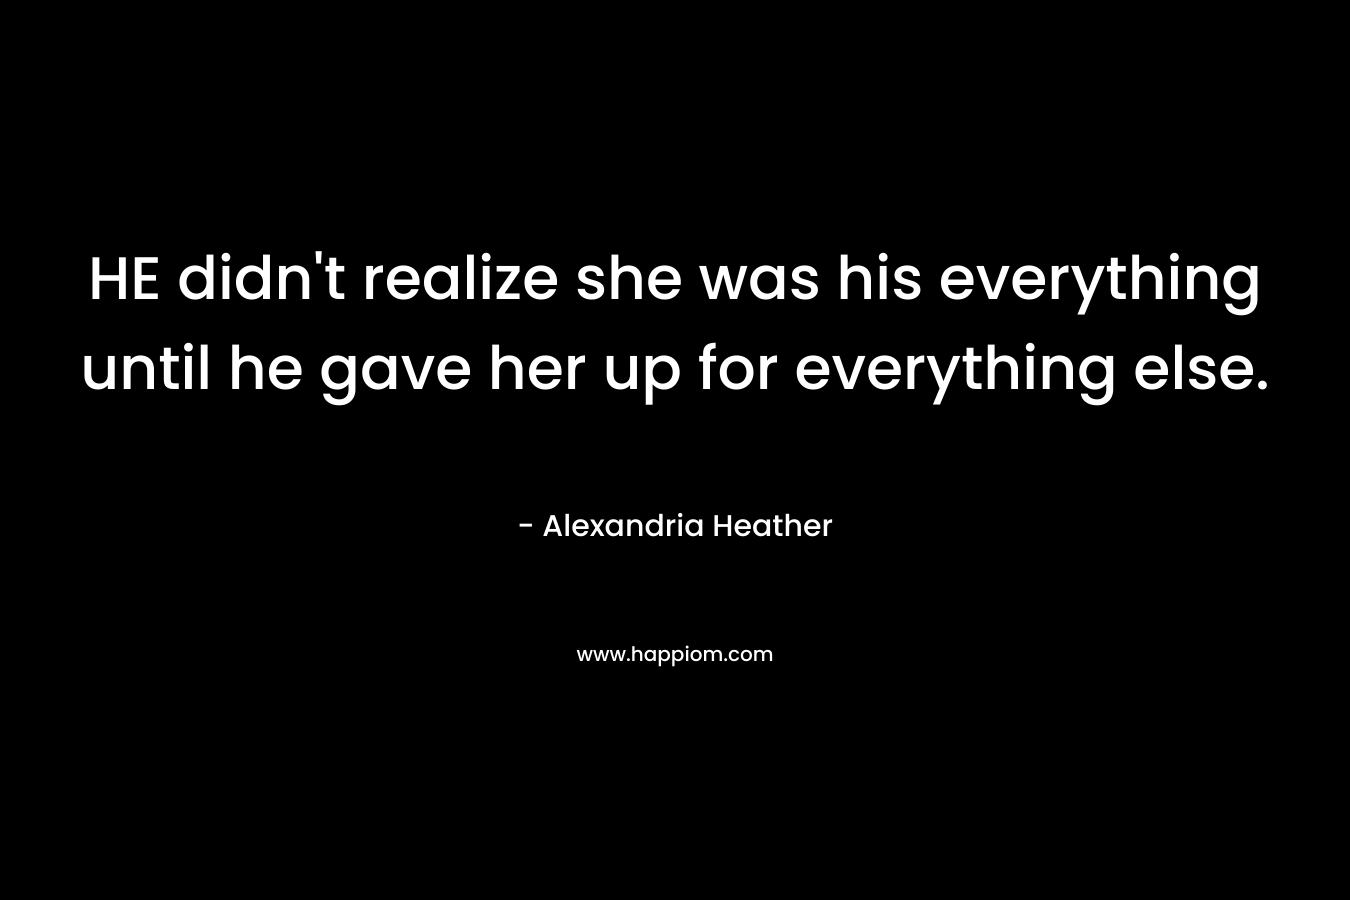 HE didn't realize she was his everything until he gave her up for everything else.